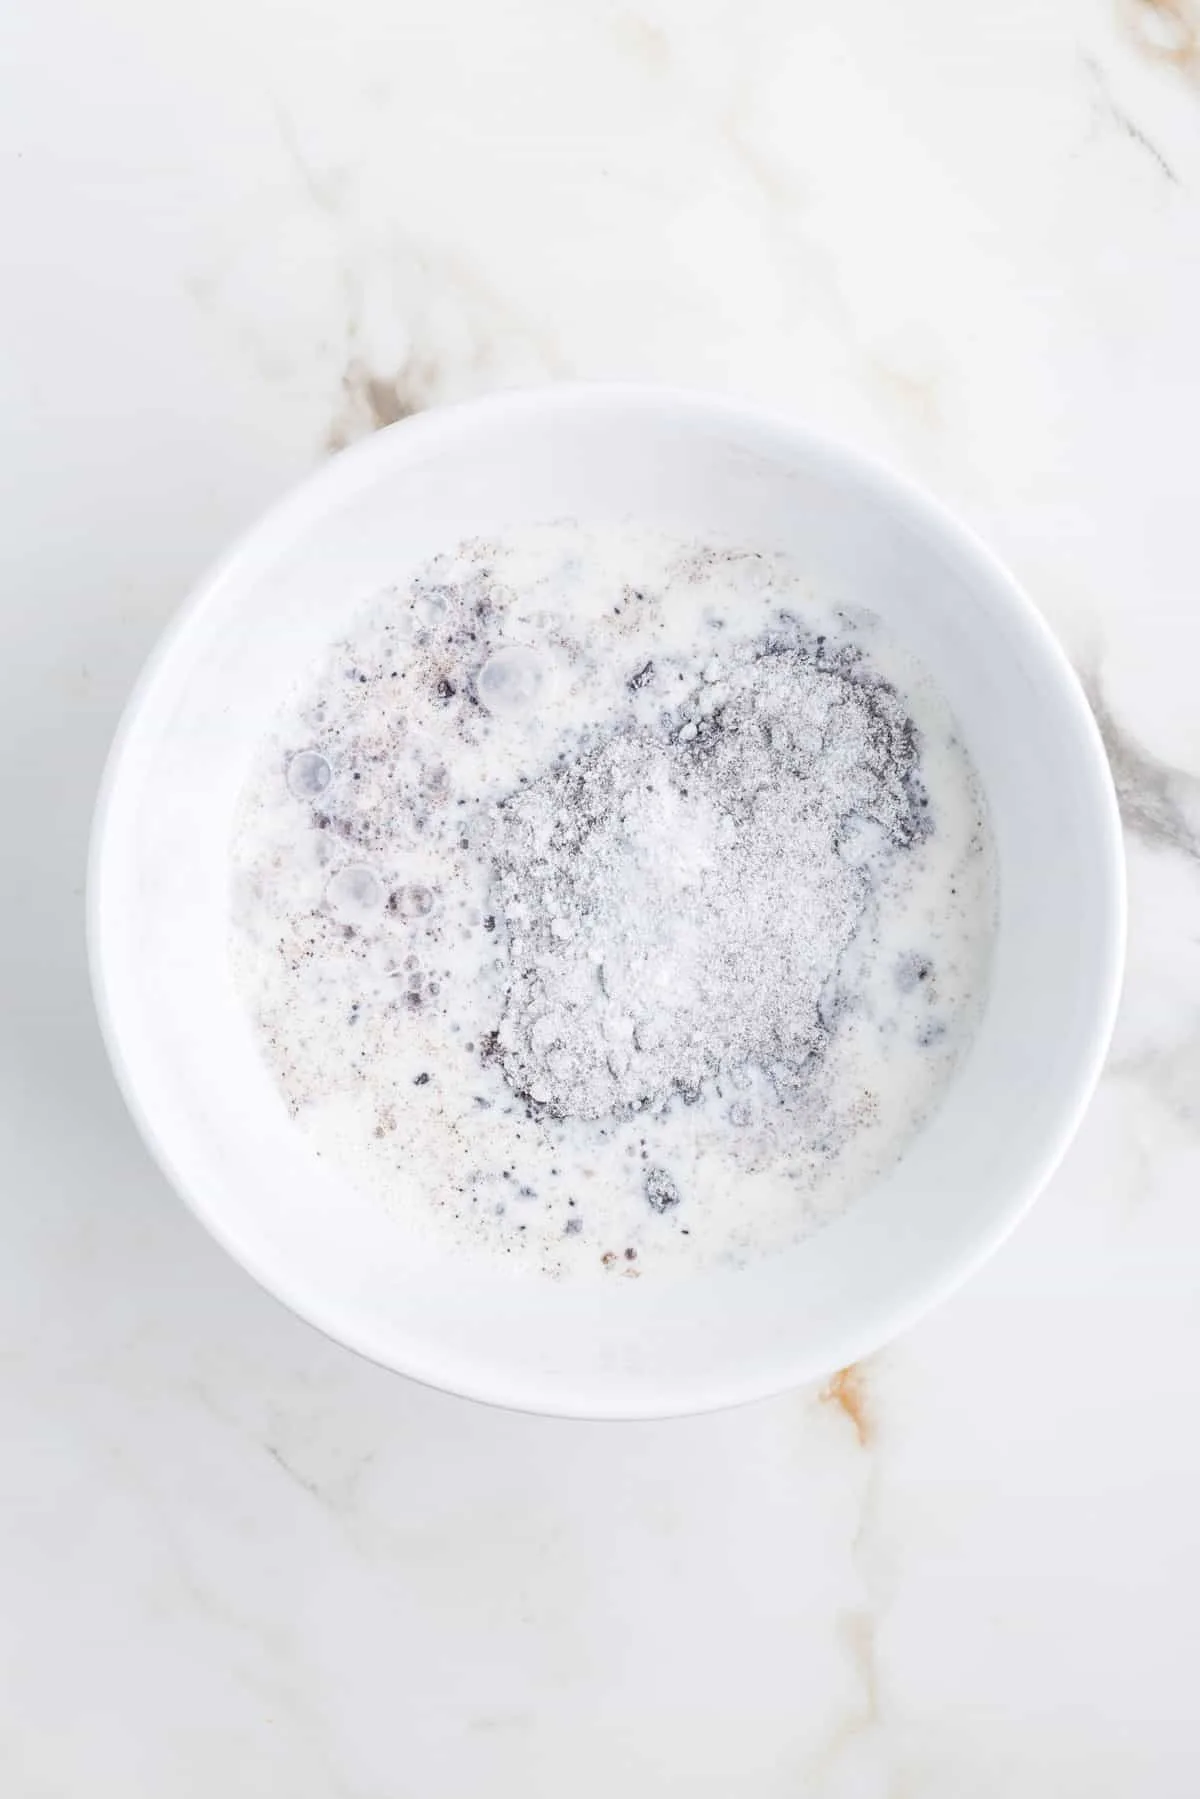 milk and Oreo pudding mix in a mixing bowl